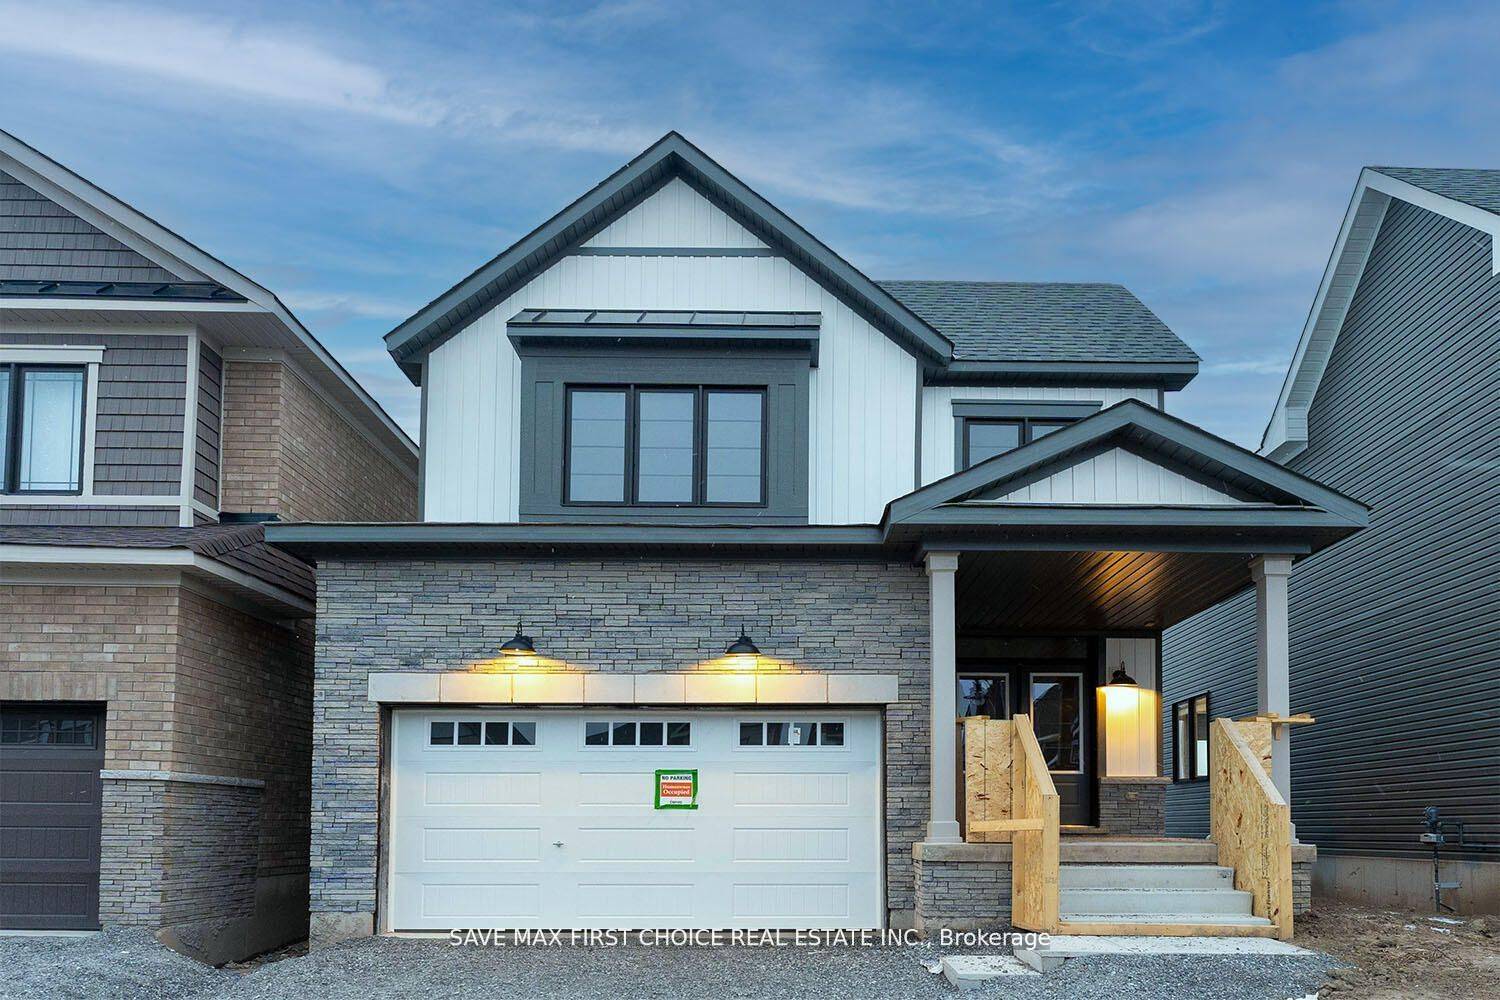 Search no more ! Introducing The Canal By Empire Communities an extraordinary detached home perfect for you to lease in the burgeoning neighborhood of Welland.